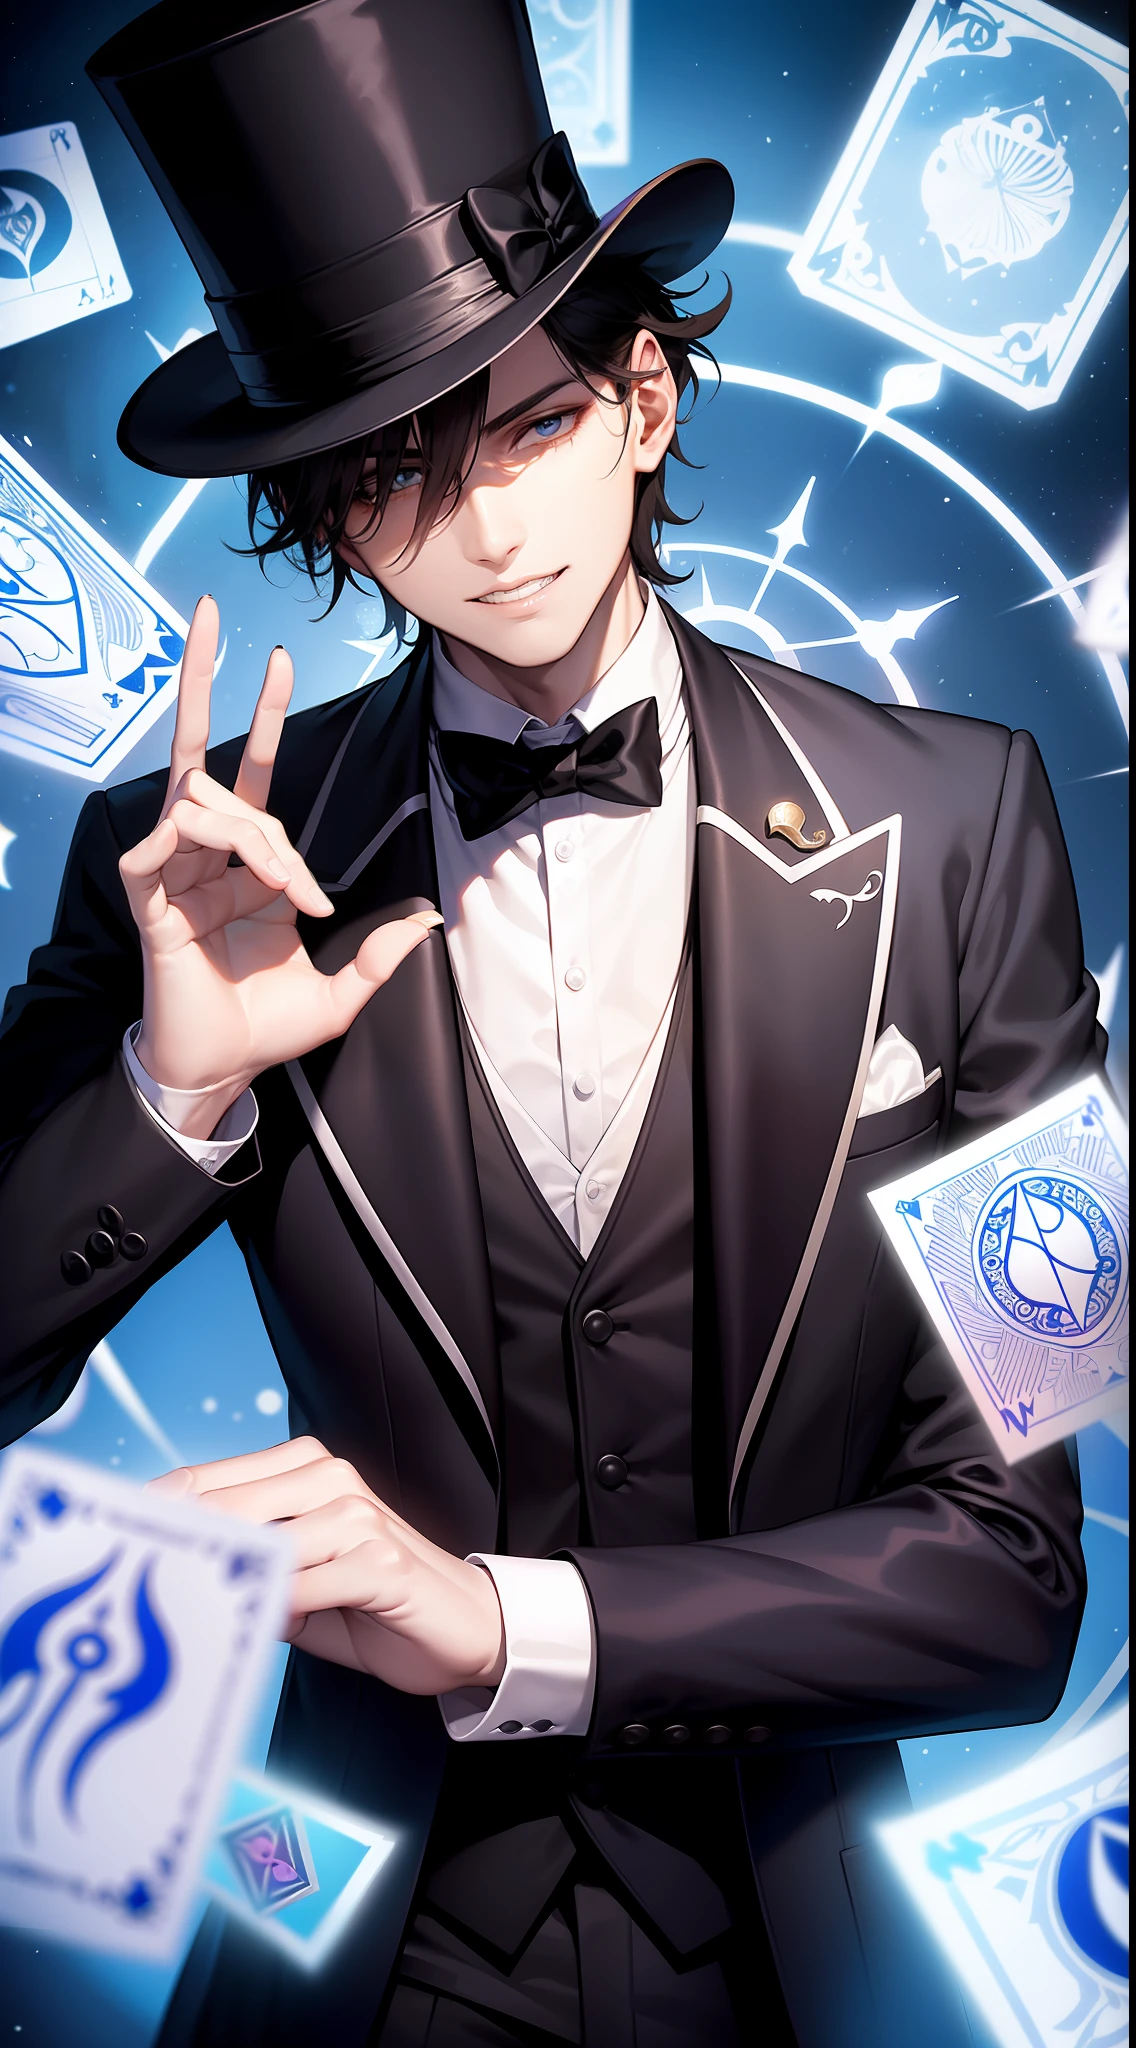 a magic wearing a suit and a top hat using a white mask with floating tarot cards surrounding him